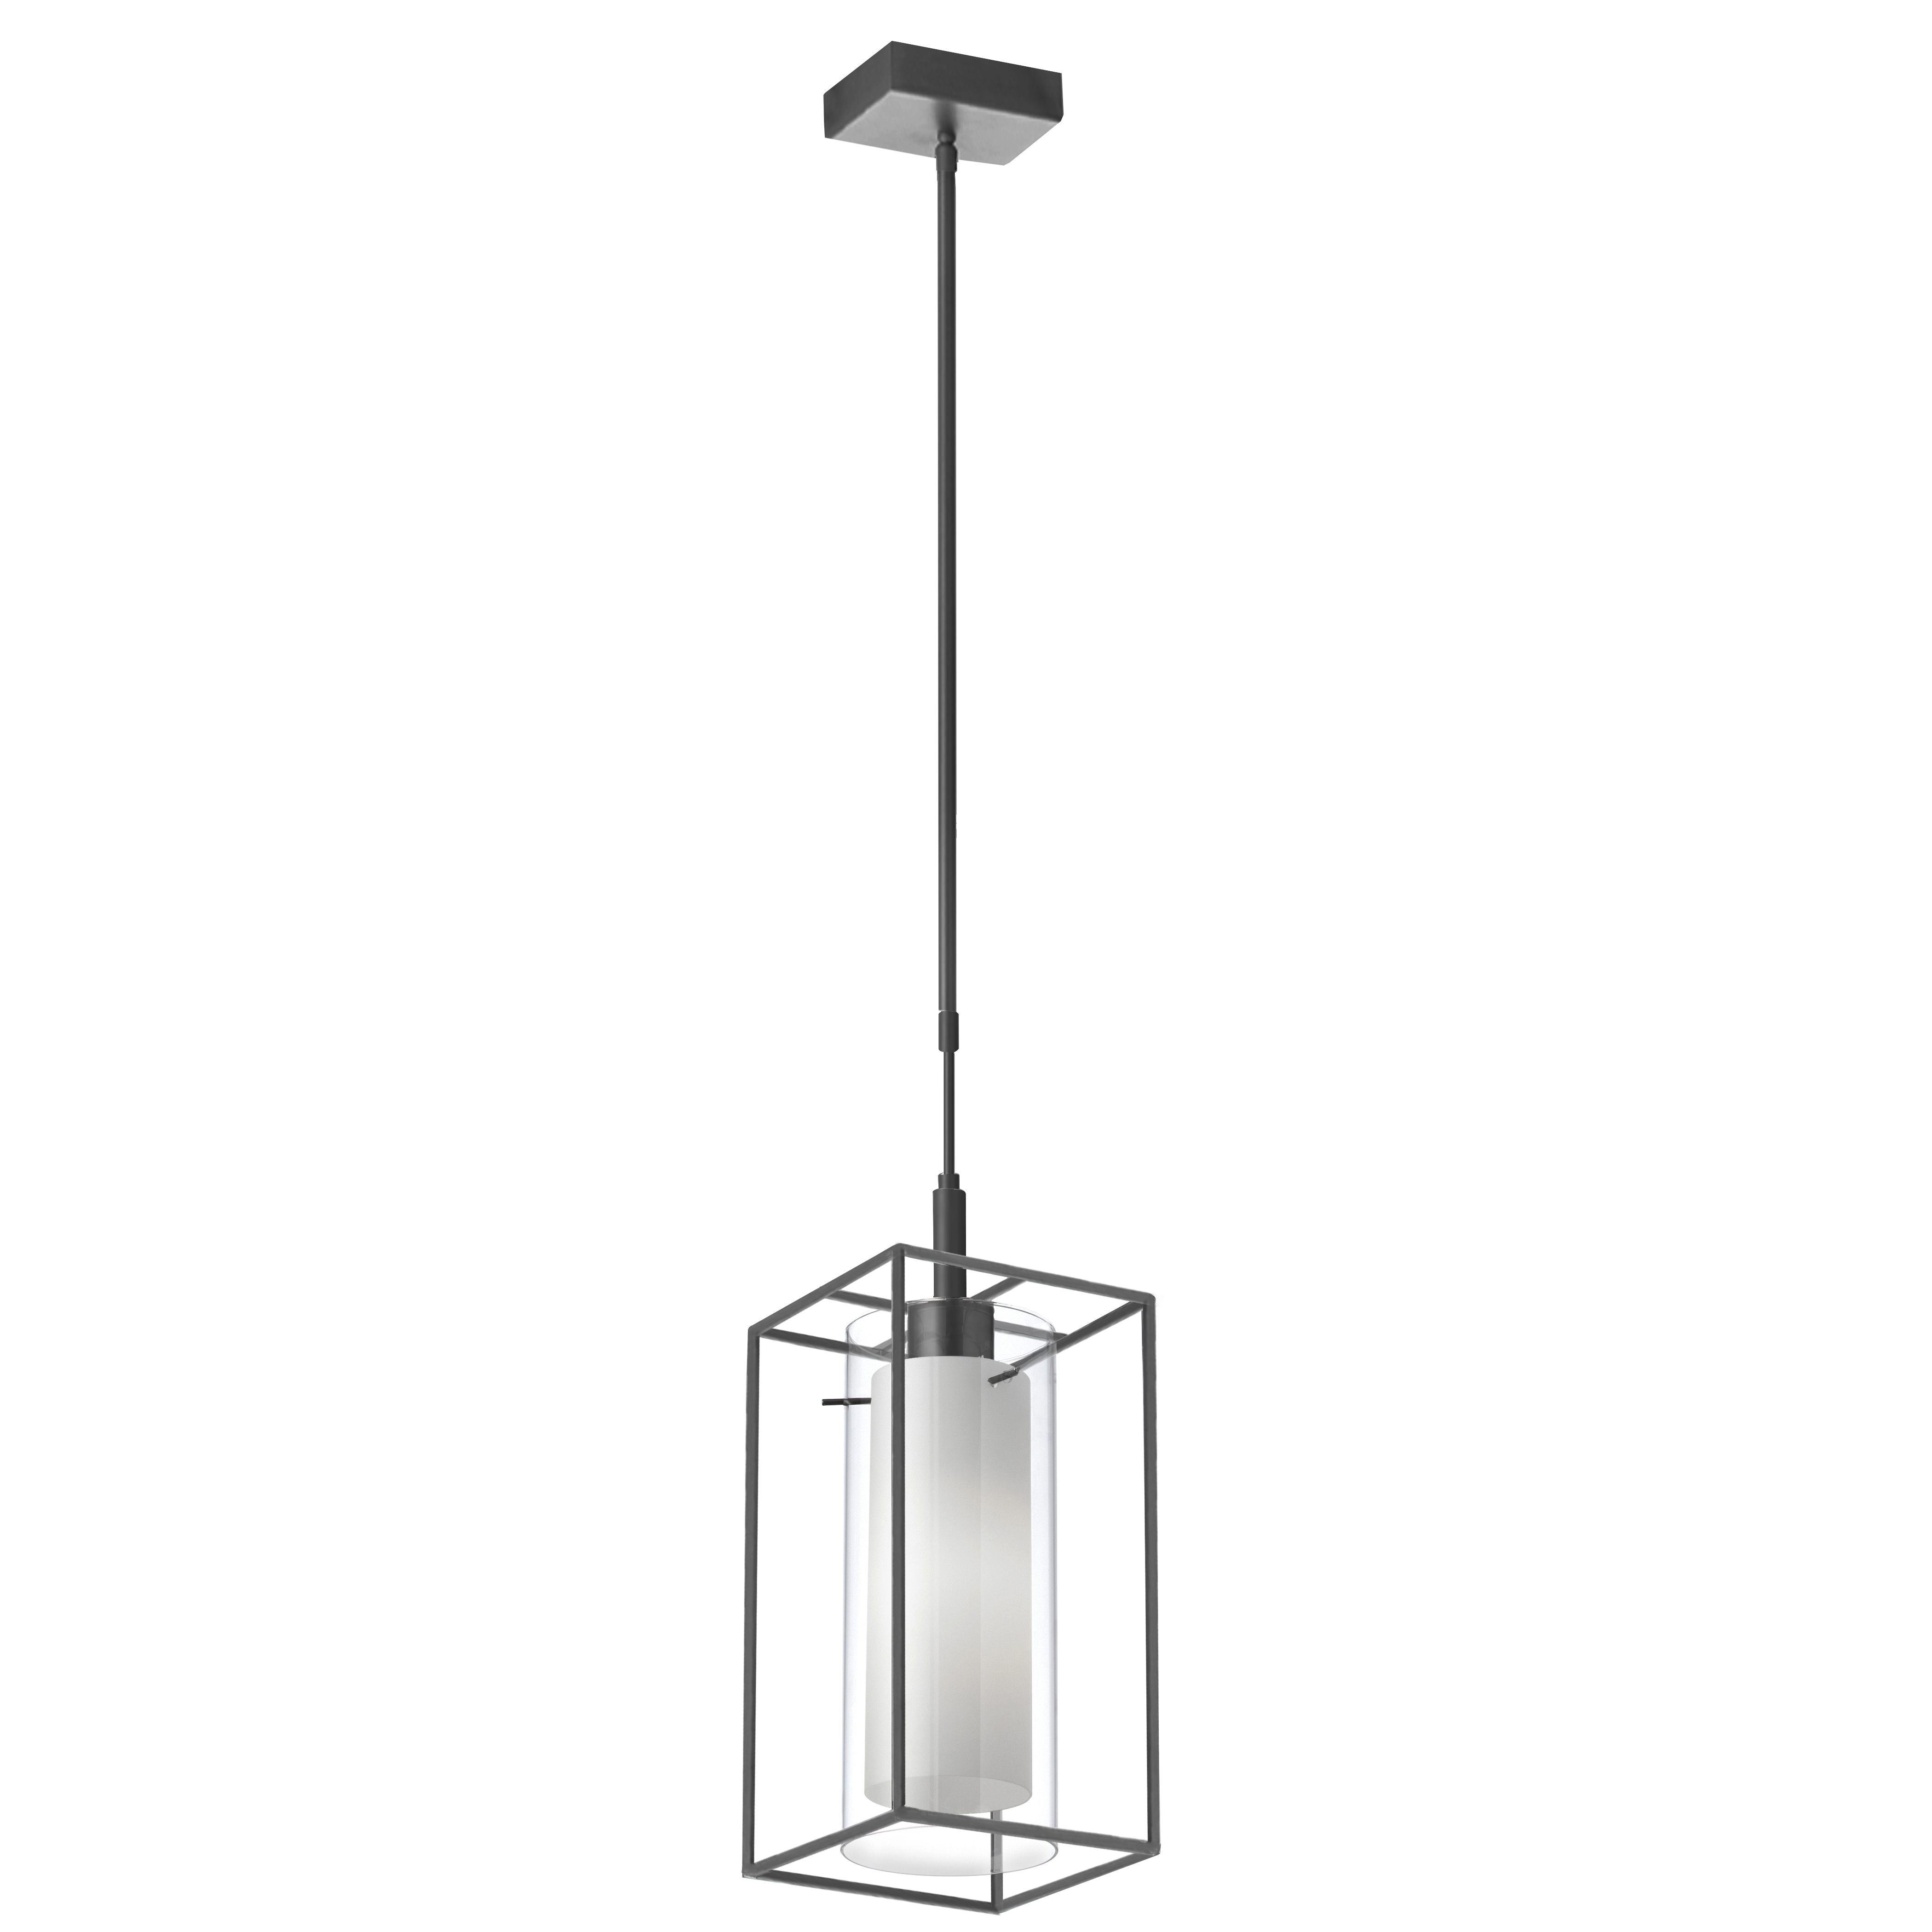 Straight and curved lines provide an eye-catching contrast in the Cubo family of lighting. If style is all in the details, Crawford lighting jumps ahead of the crowd. A rectangular metal base drops from a straight rod, crafted in an open design with a grid on the top side to accommodate the light housing. Inside, a glass cylinder holds the light. Available in a variety of finishes, it will draw attention to the furnishings in a kitchen or dining room, and add a touch of luxury to your foyer.